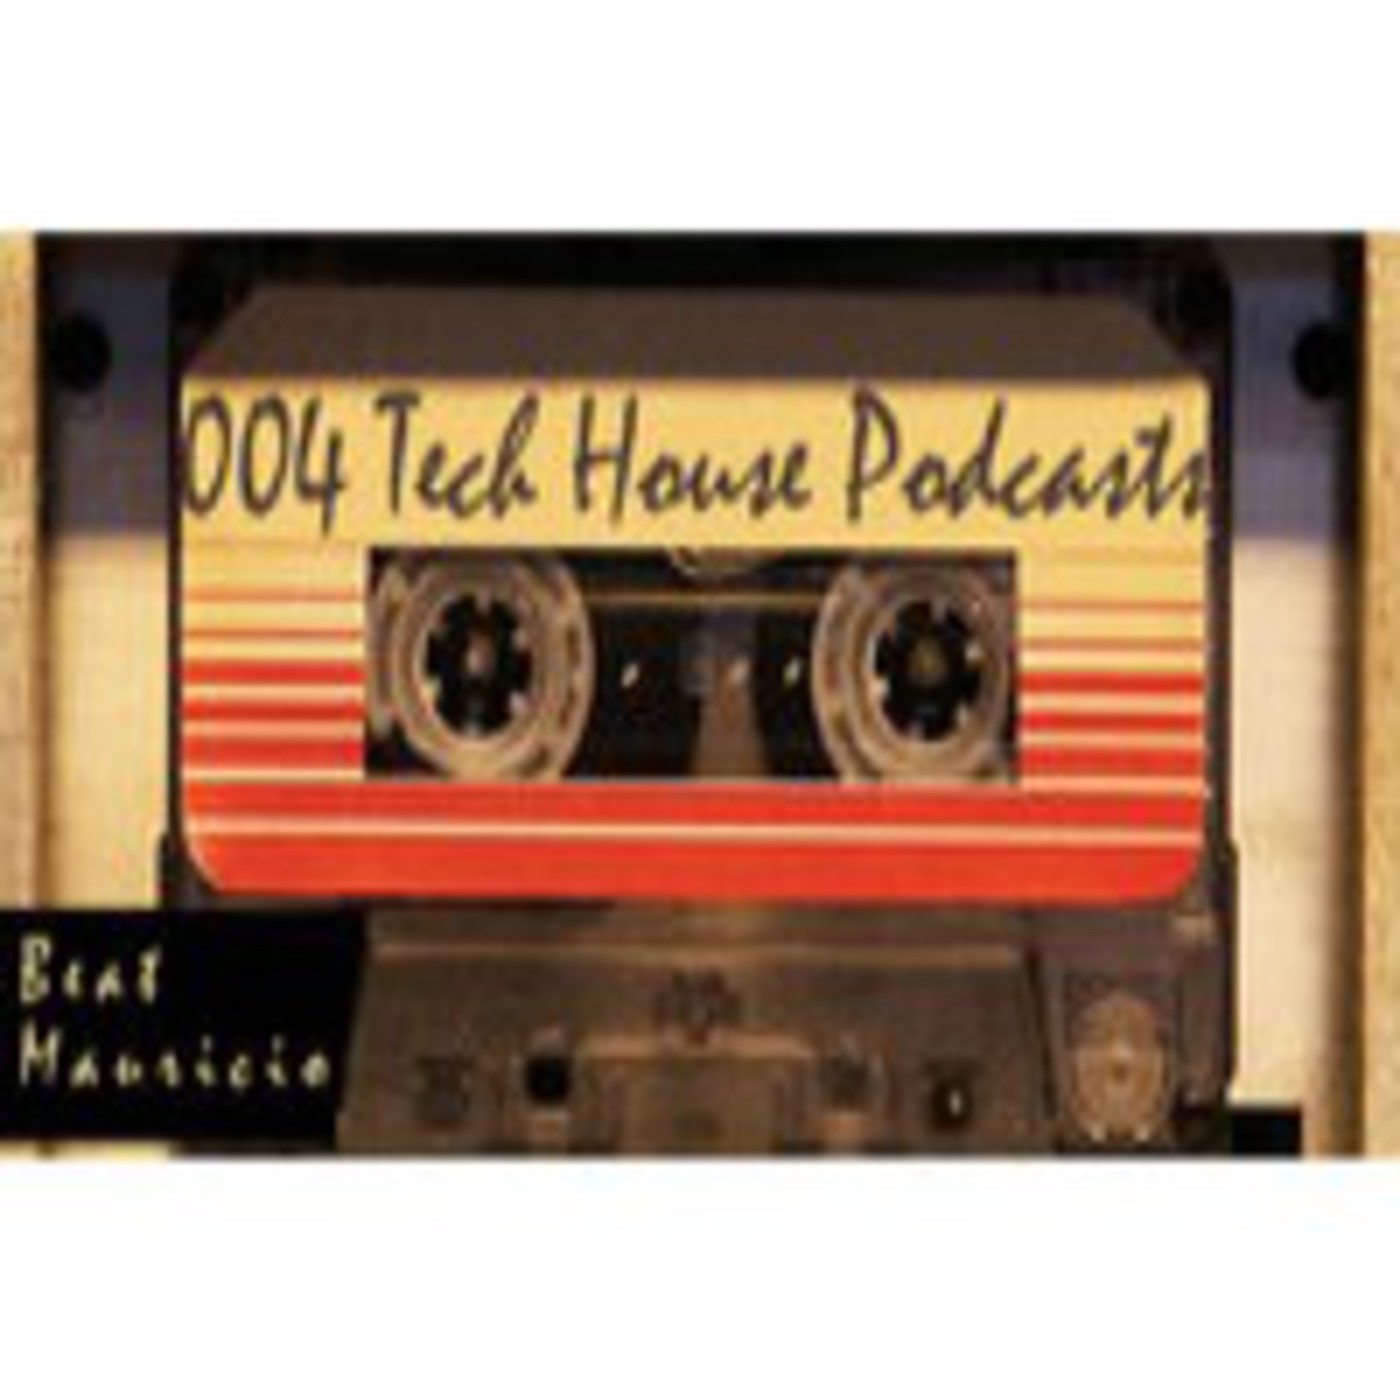 004 Tech House Podcasts by Beat Mauricio